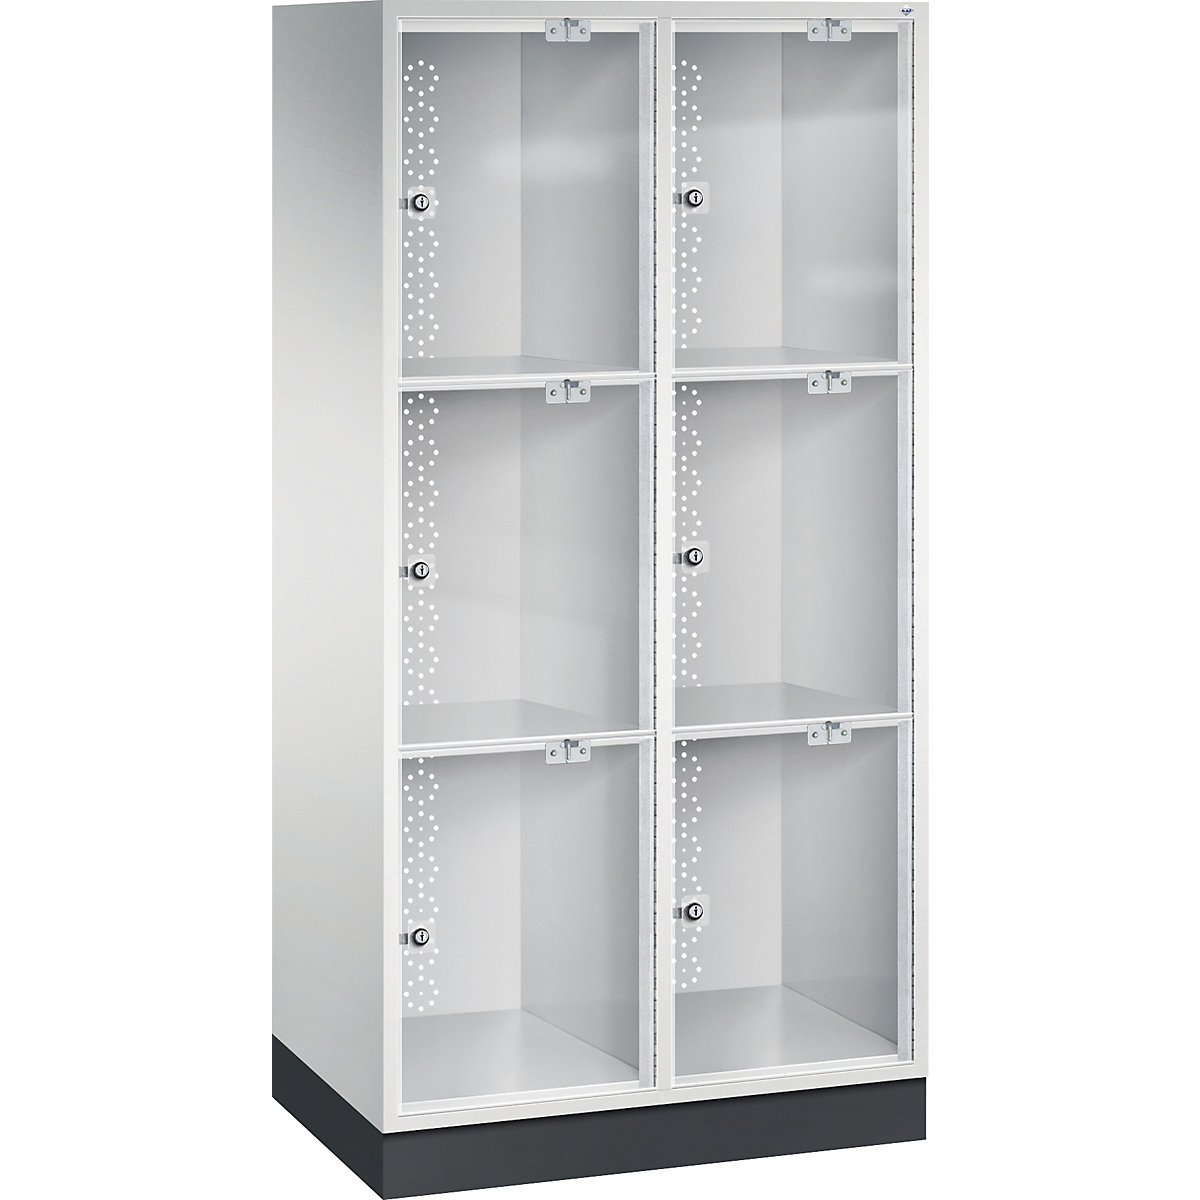 | INTRO C+P: compartment x 500 height – glass 820 510 mm, kaiserkraft steel with x mm, 6 door compartments compartment locker acrylic HxWxD 1750